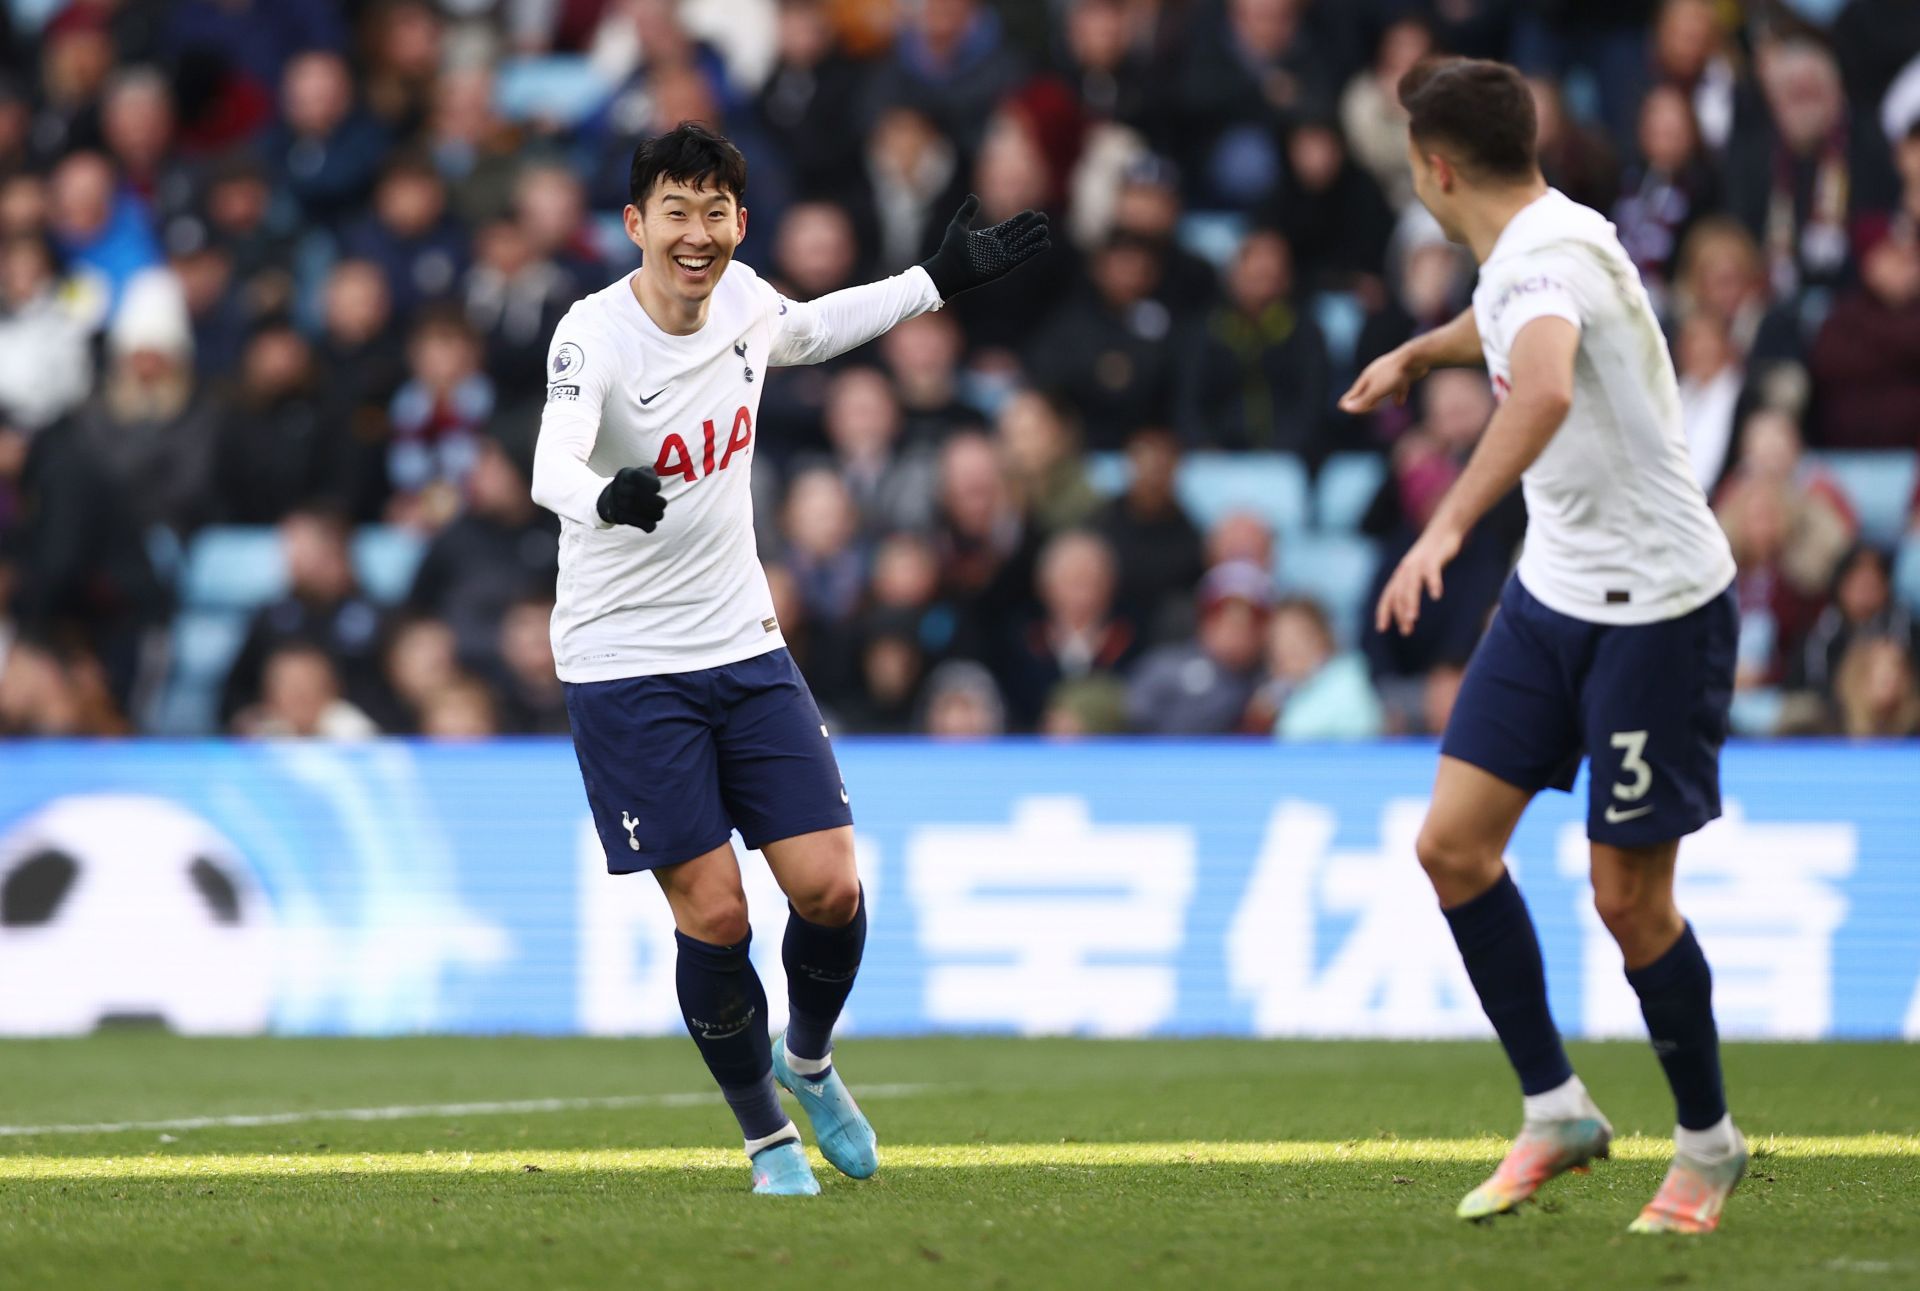 Son has been in terrific form this season